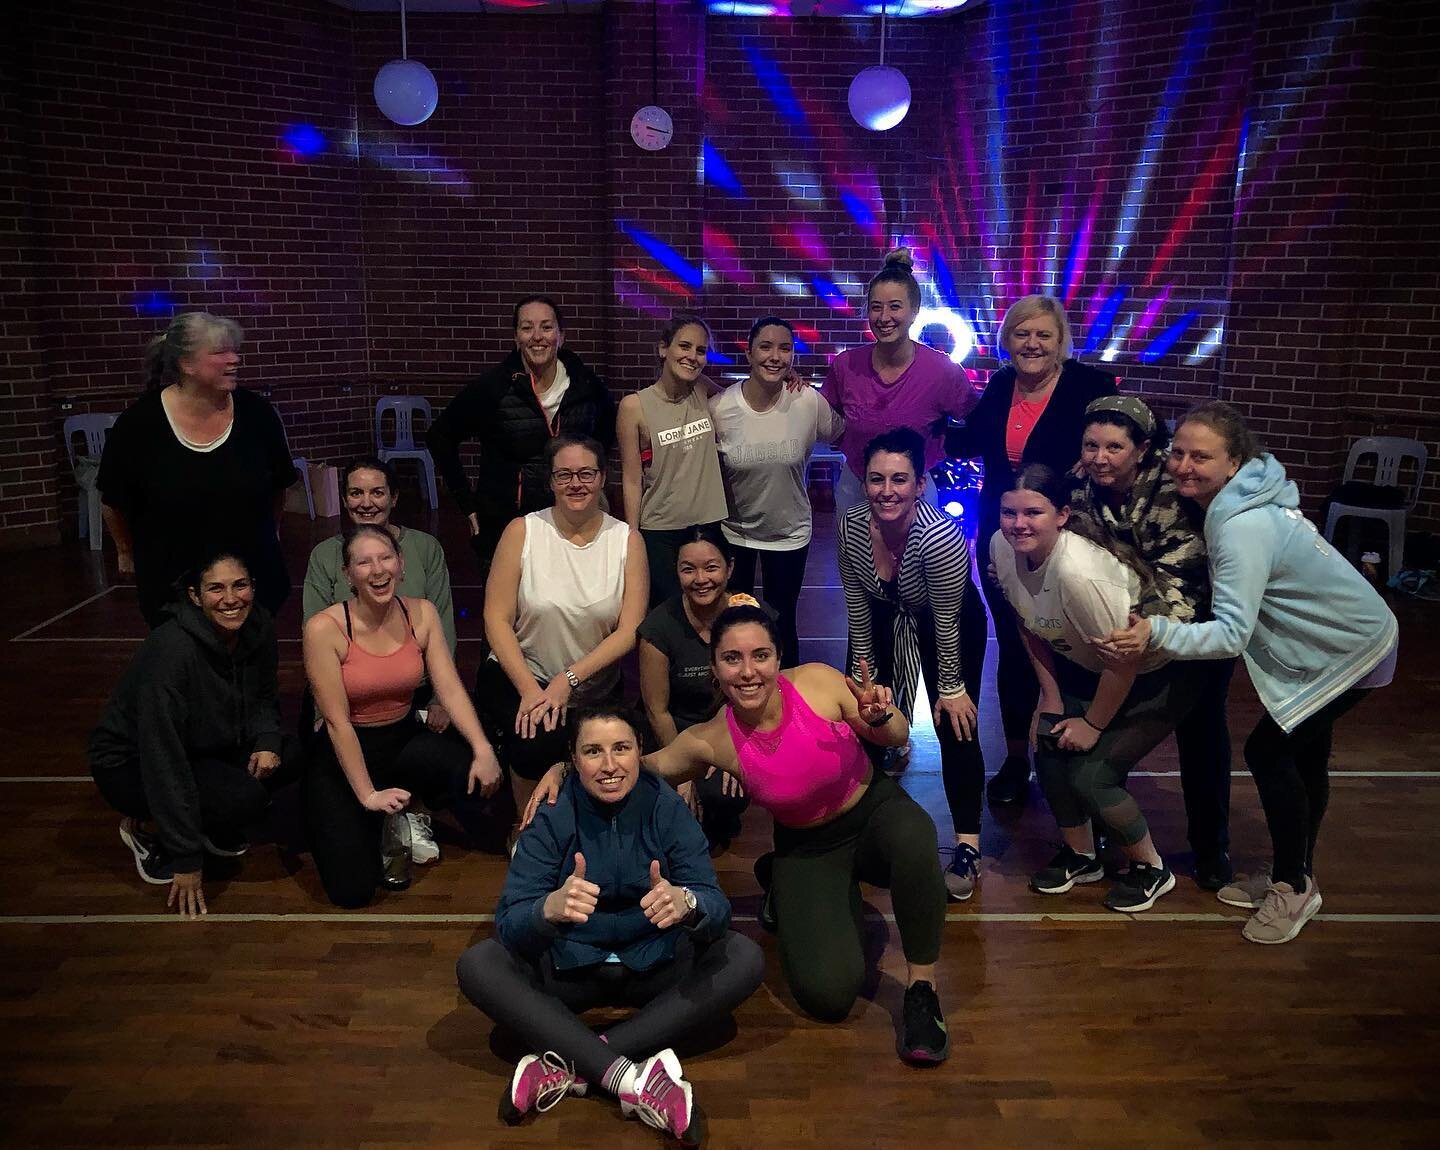 What an amazing class tonight was!! 🎉✨💫 

Thank you to all the wonderful ladies for coming this evening! The energy was through the roof! 👏🏼👏🏼

We danced, we laughed, we made new friends and most importantly we had fun!! 💃🏽❤️ 

Couldn&rsquo;t